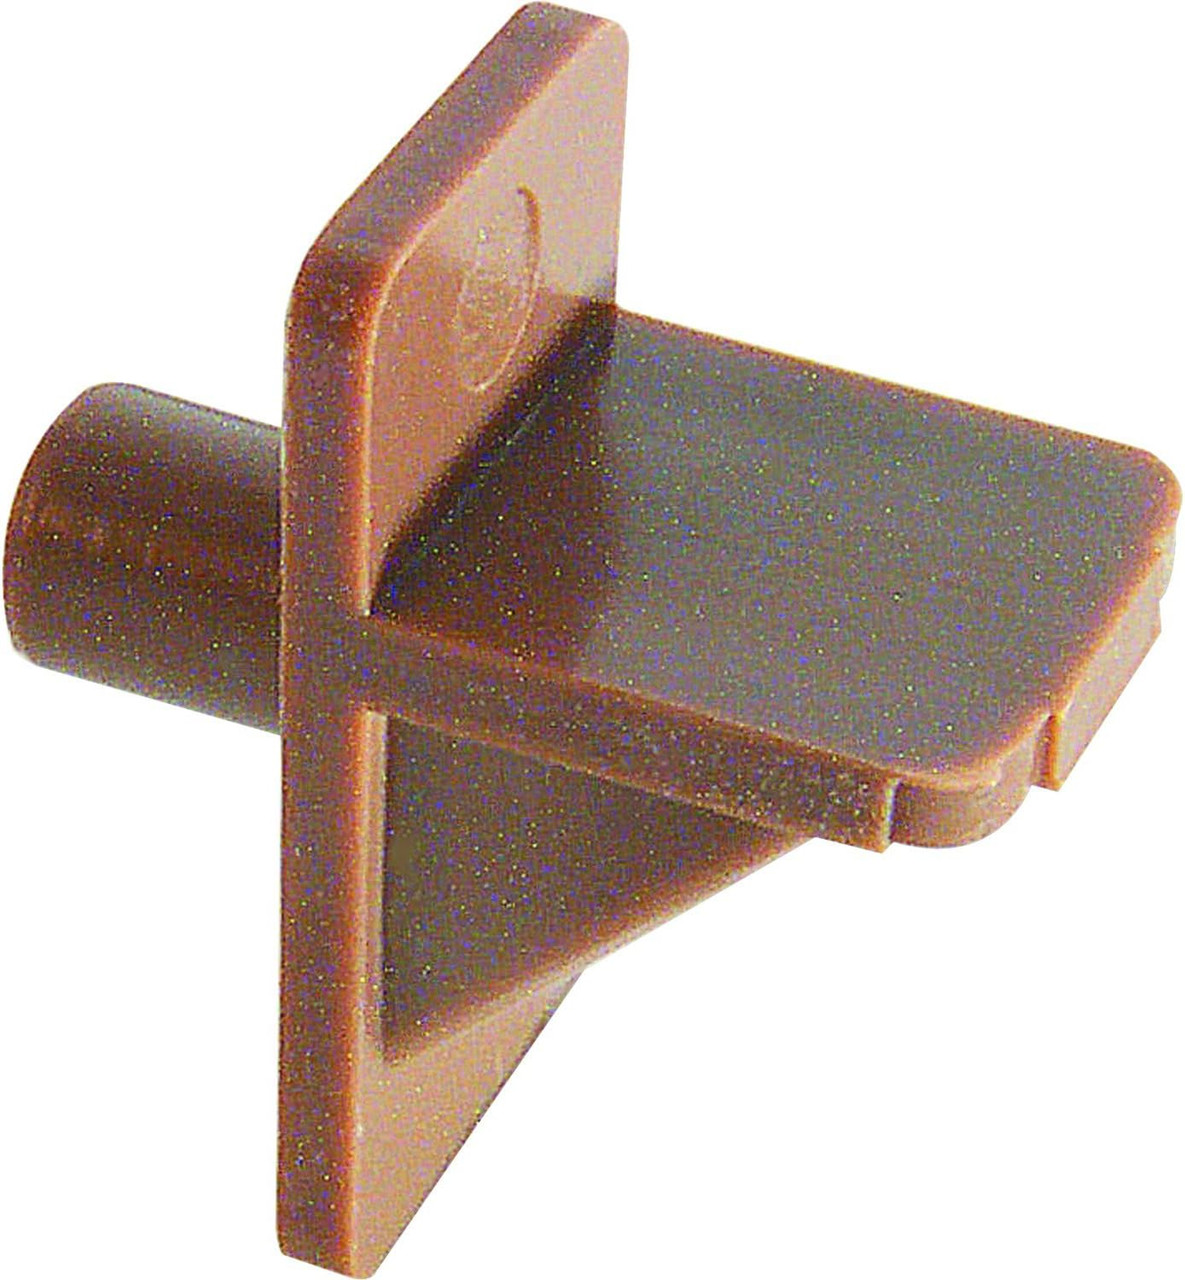 Prime-Line MP9001 Shelf Support Pegs 1/2 In. Width X 1 In. Length X 1/4 In. Diameter Plastic Light Brown (50 Pack)